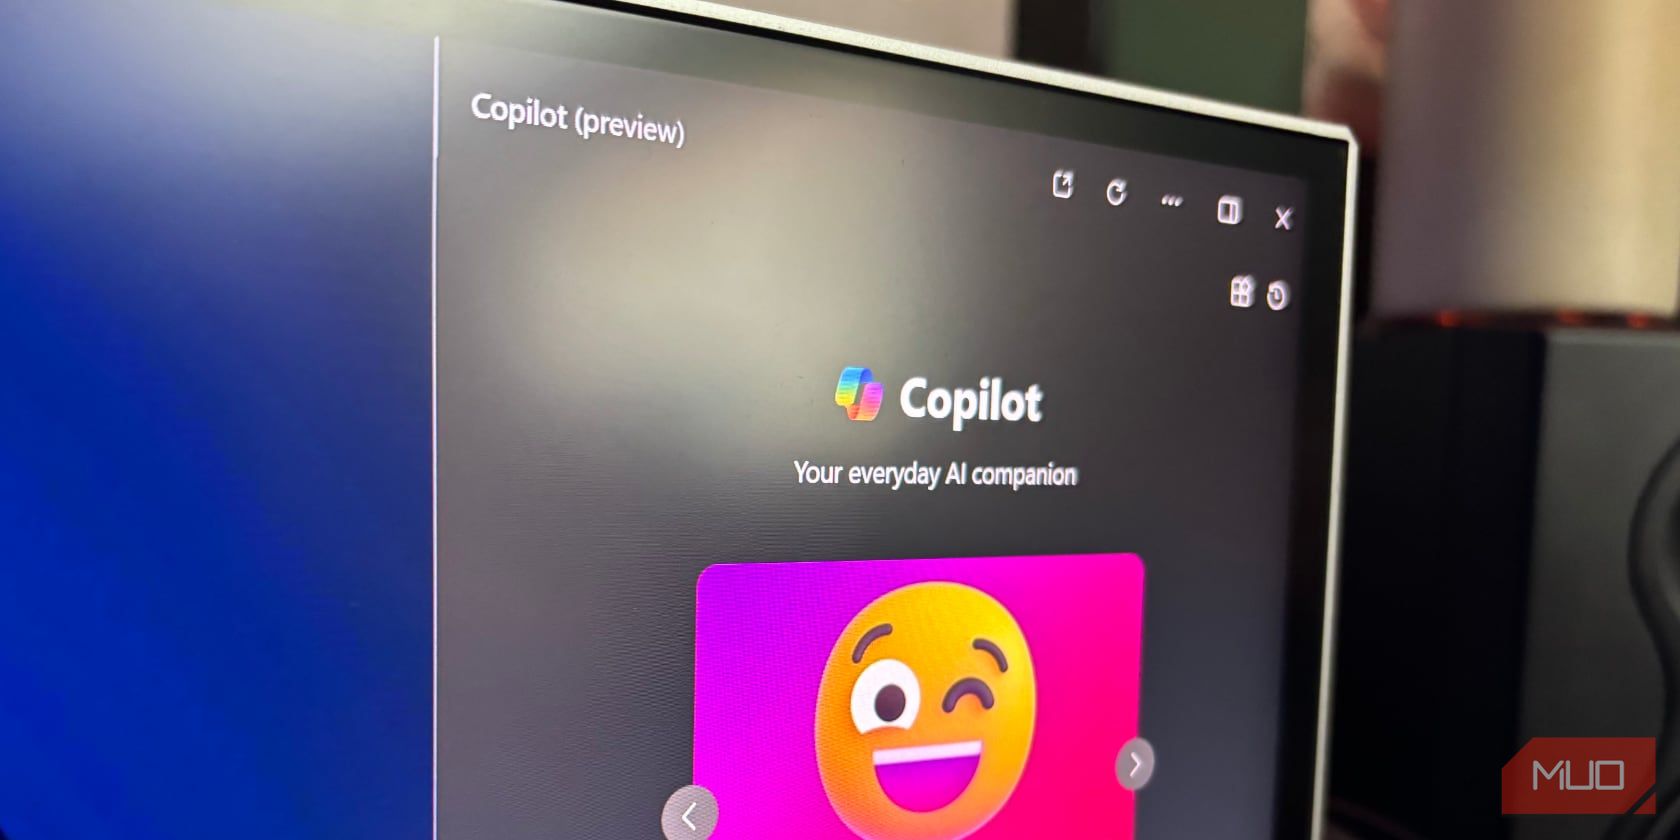 Can't find Copilot on Windows 11 featured